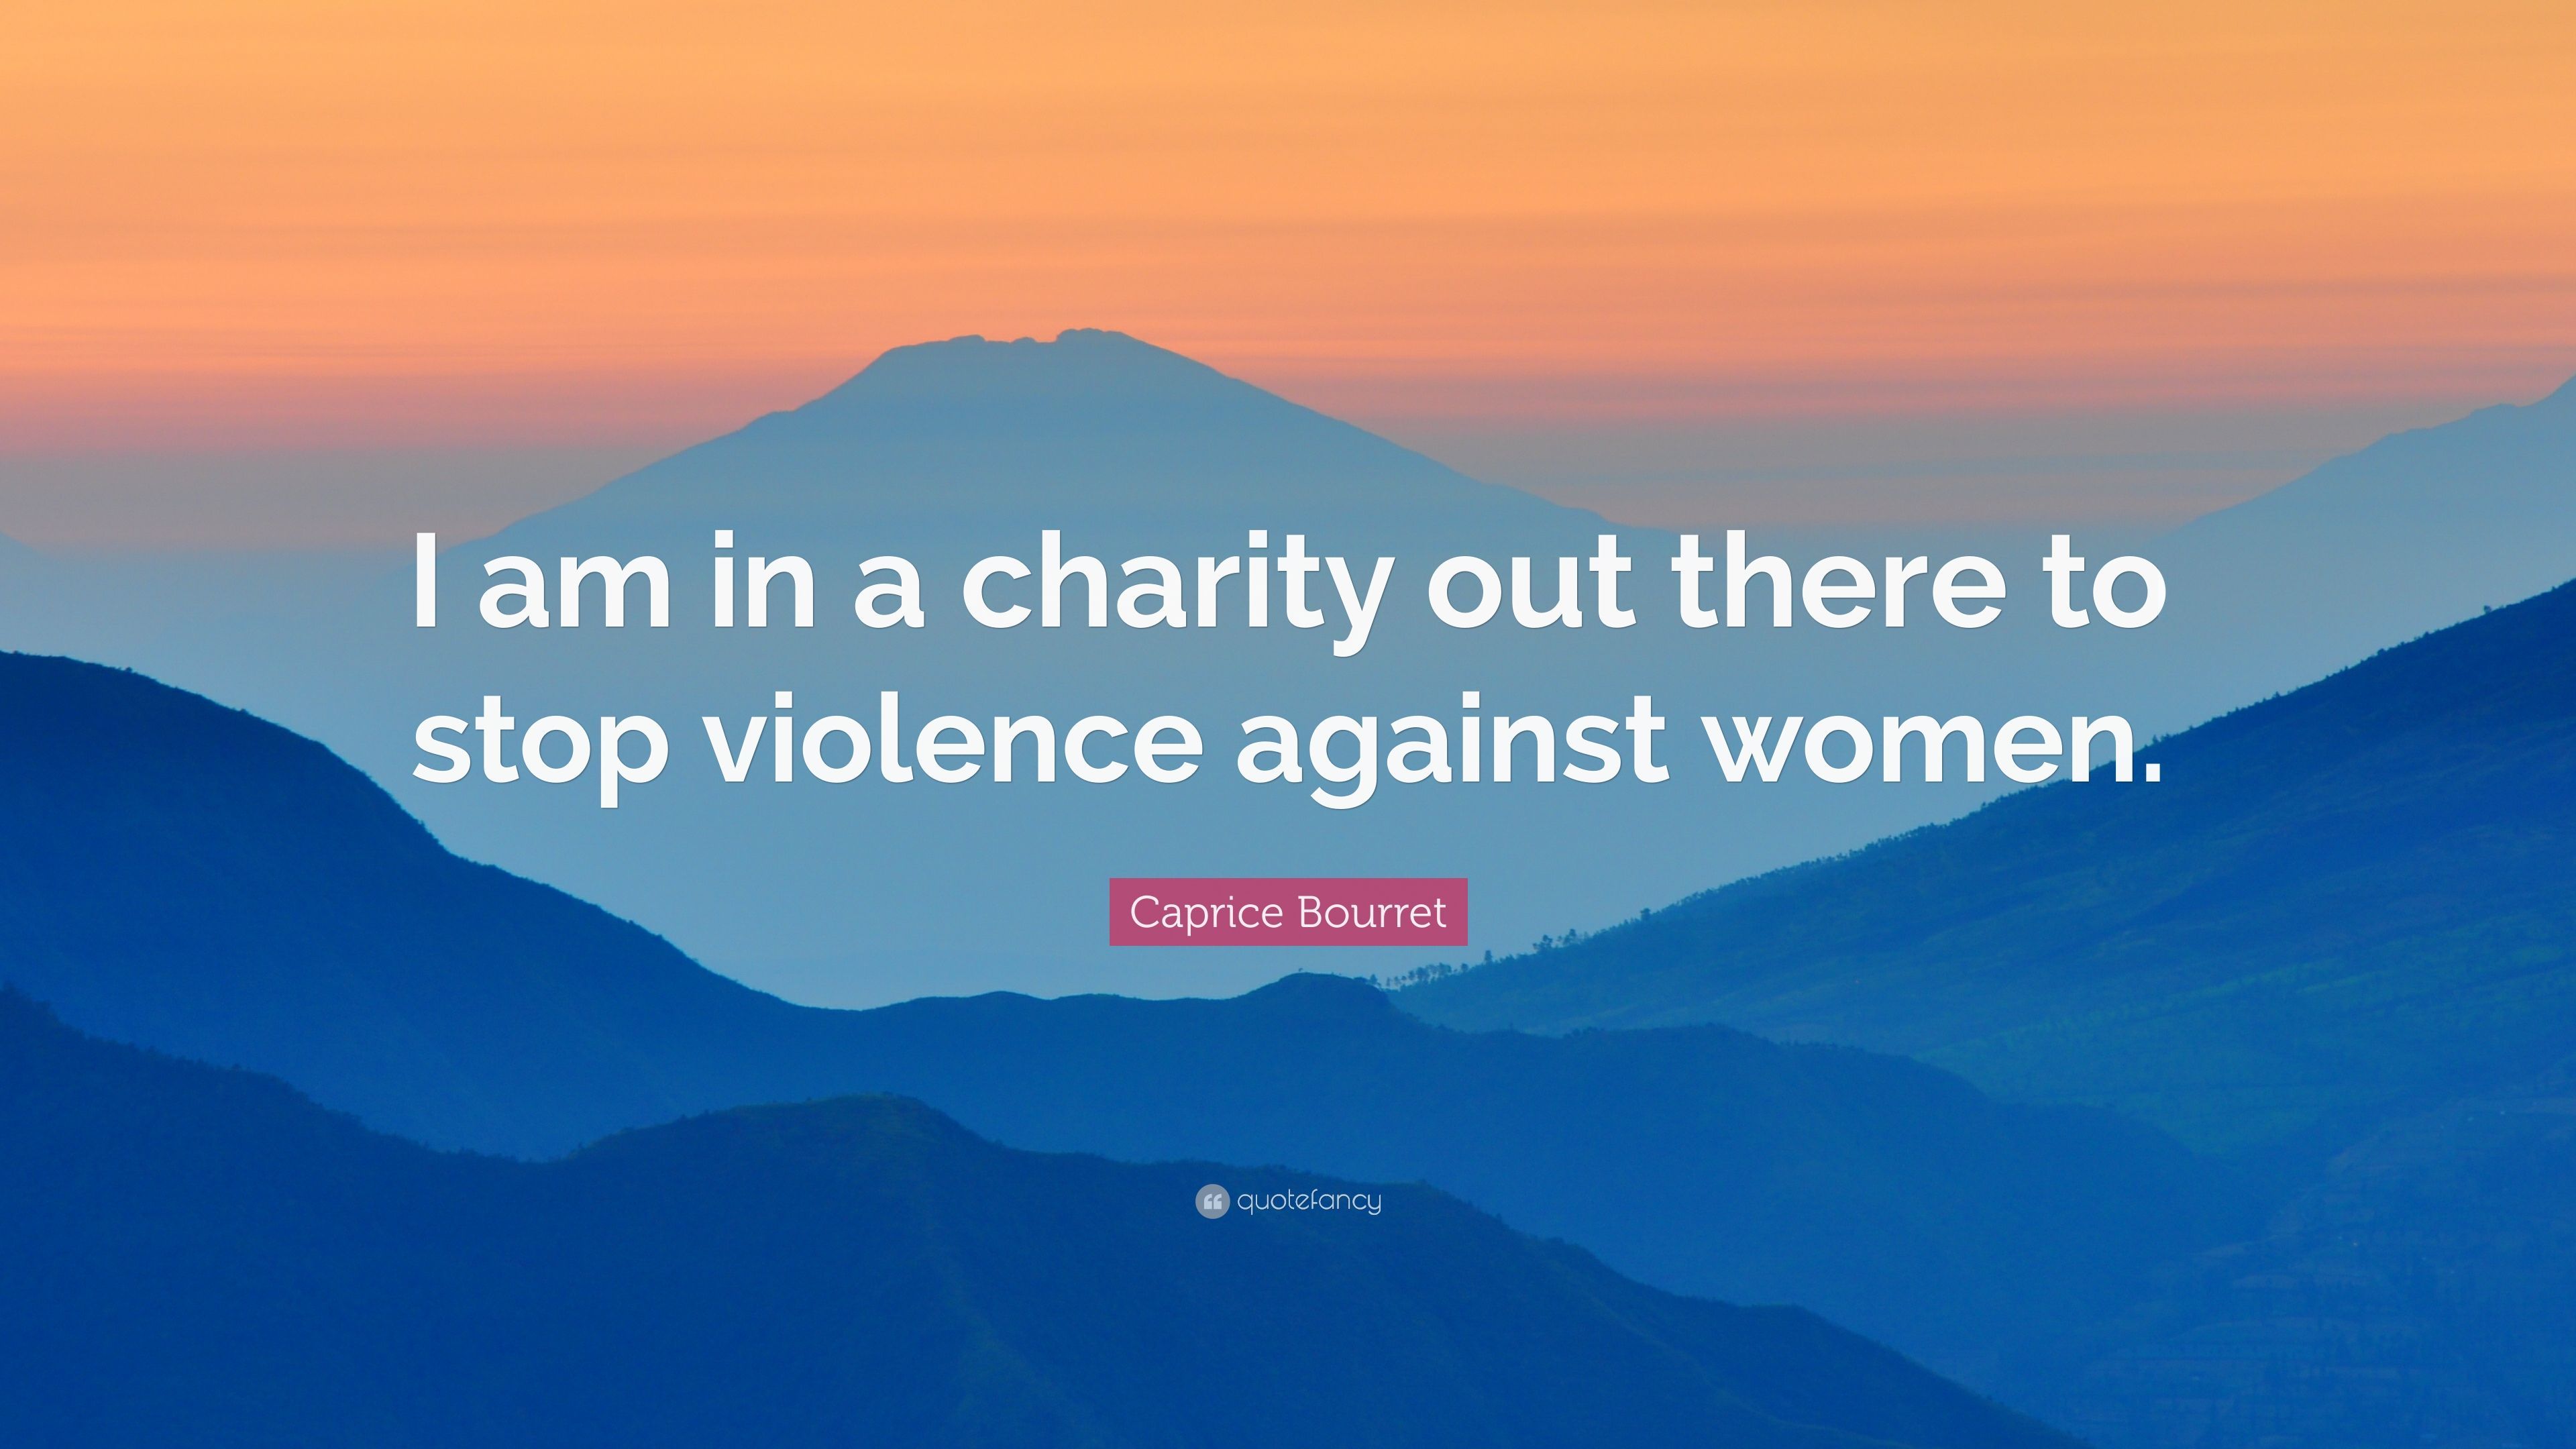 Caprice Bourret Quote: “I am in a charity out there to stop